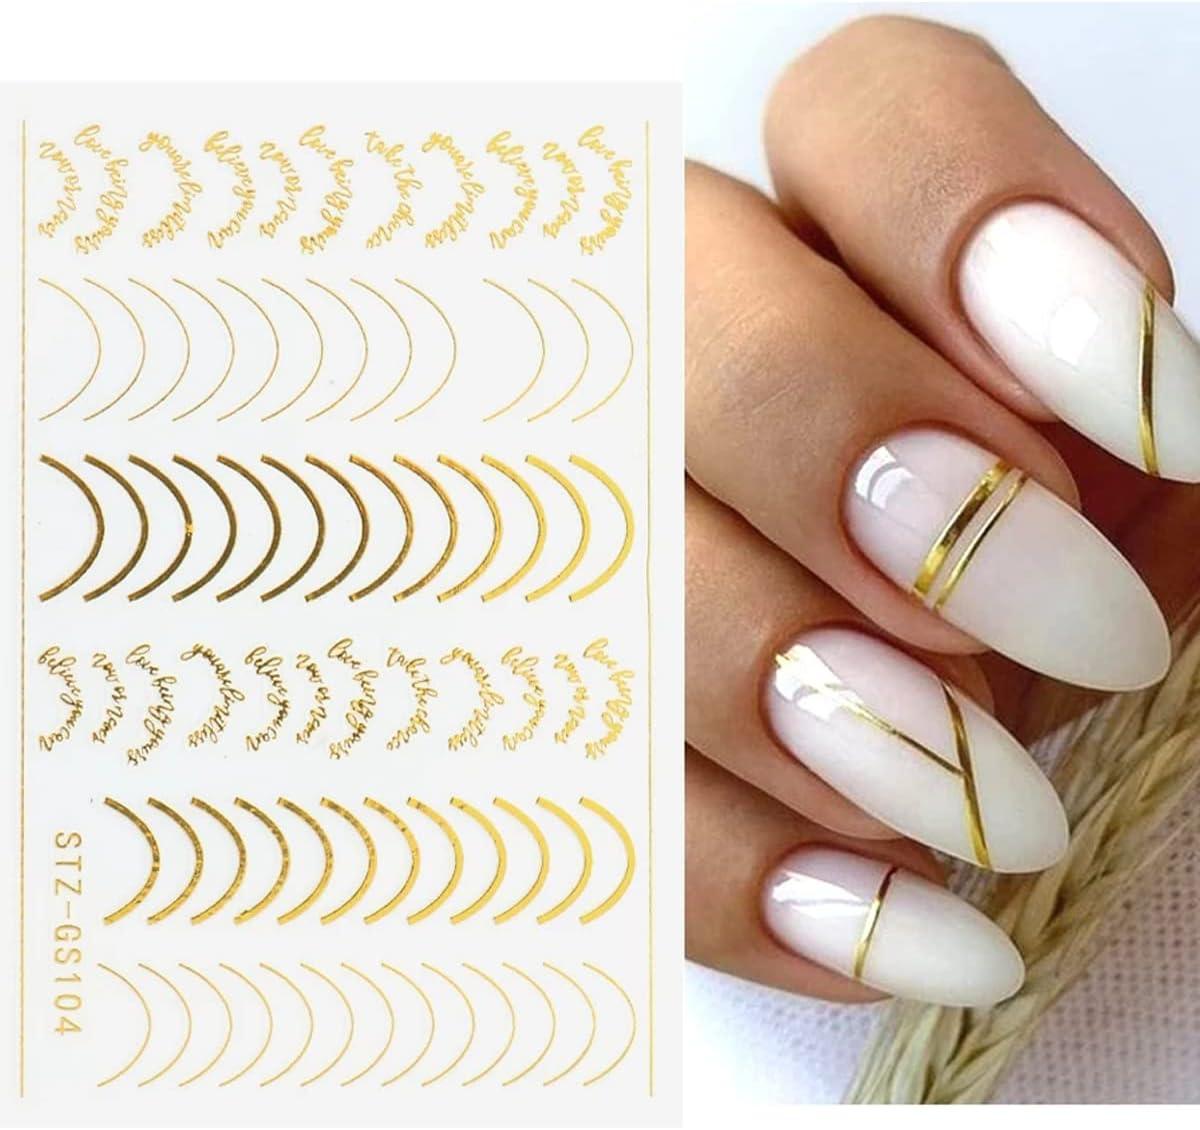 Snow White Manicure on Female Hands. Winter Nail Design Stock Image - Image  of short, cuticle: 60750451